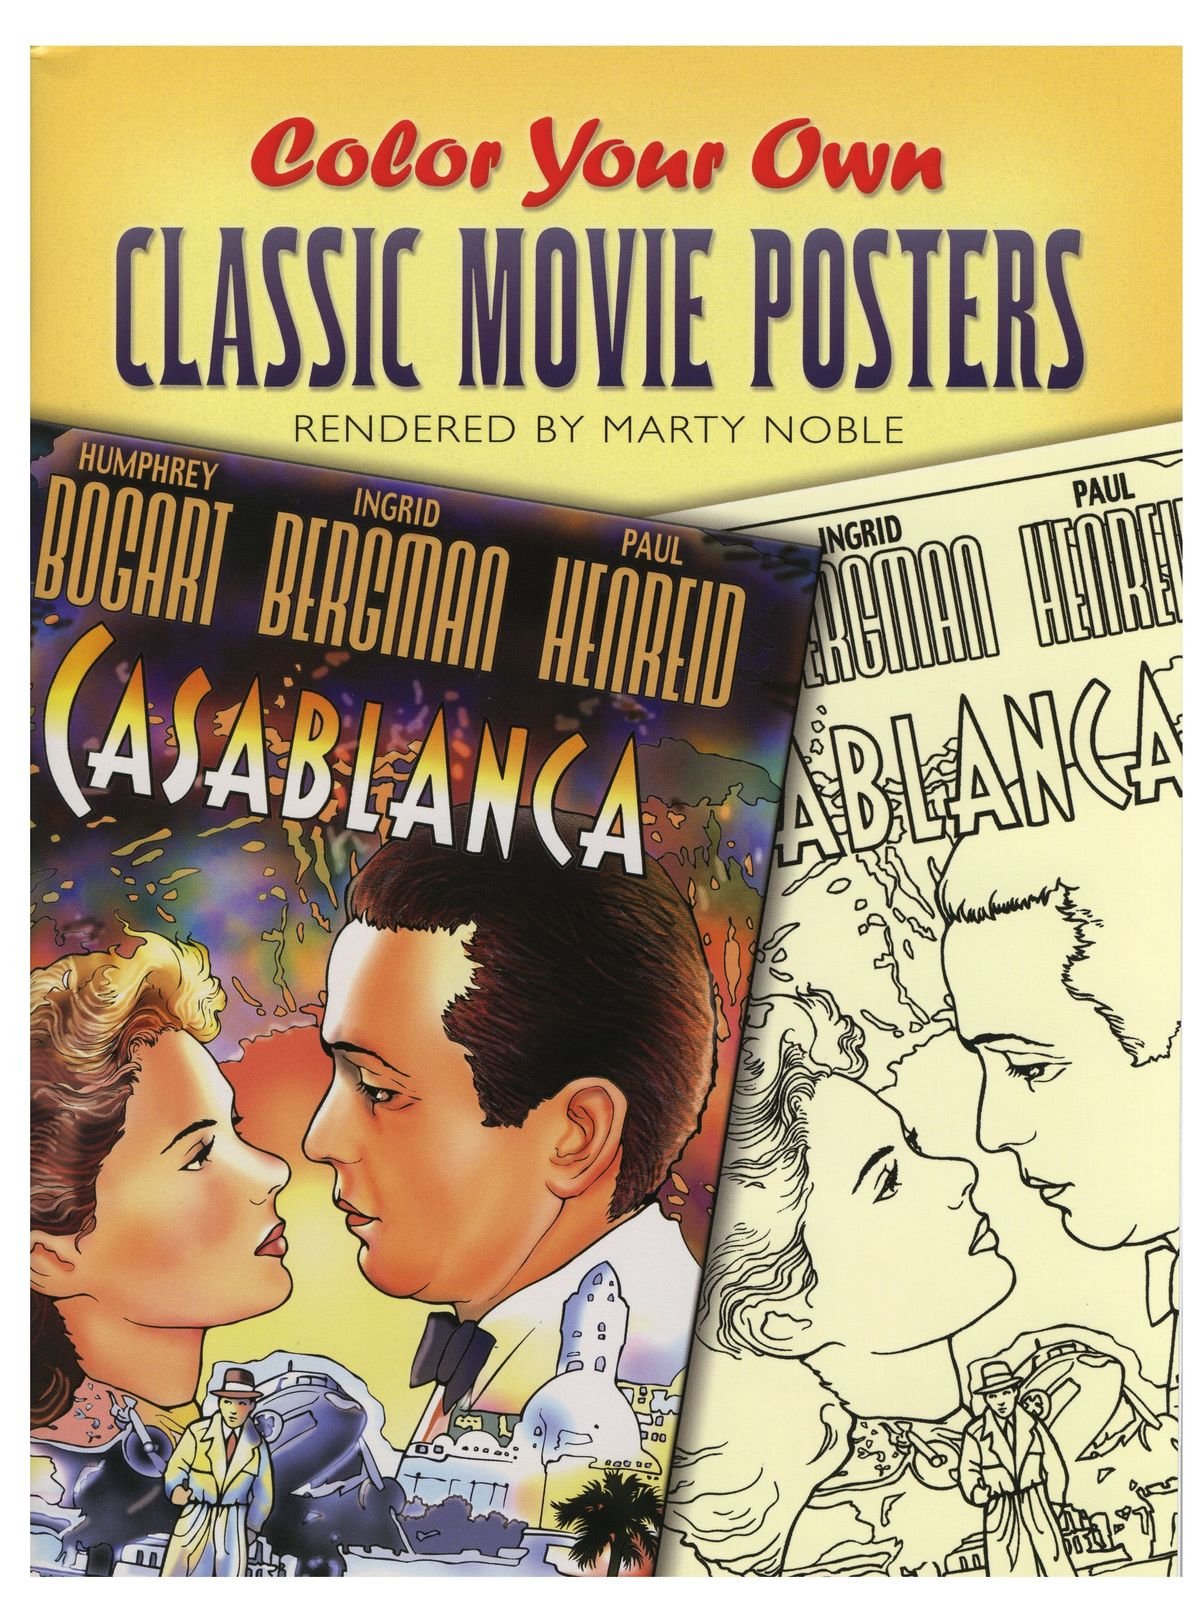 Dover - Color Your Own Classic Movie Posters